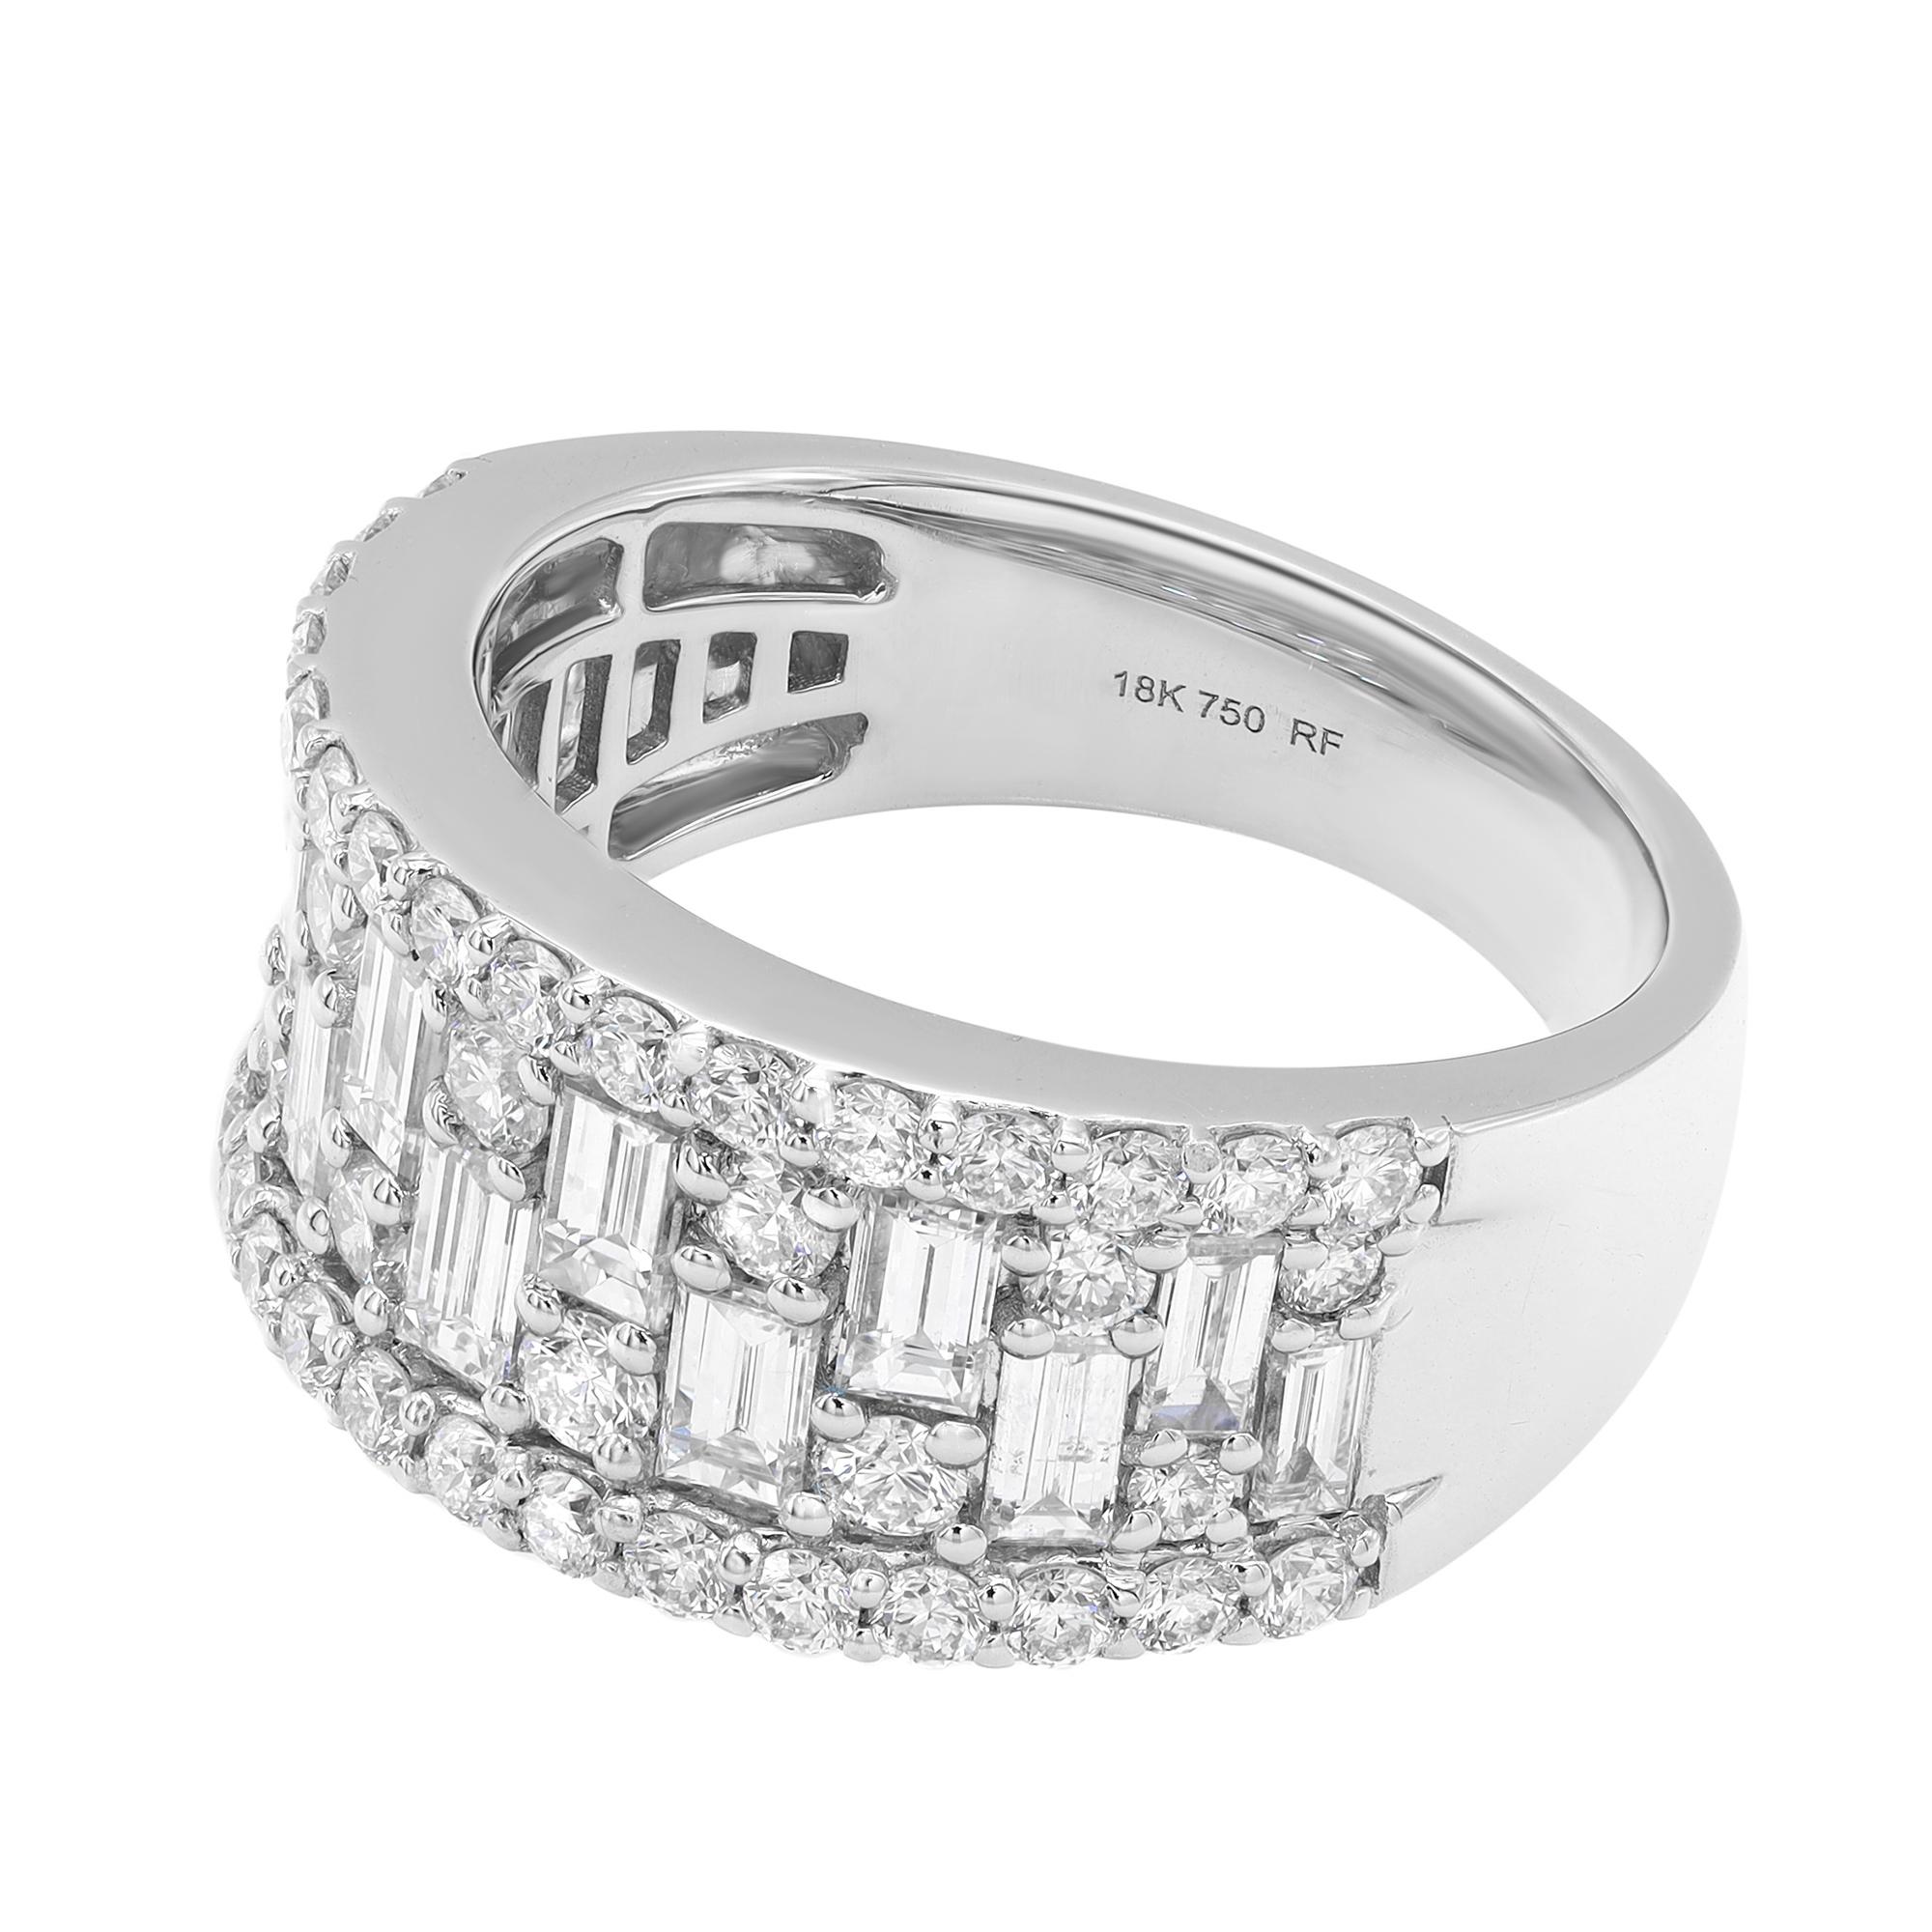 Modern ladies thick band ring crafted in 18k white gold. This ring features baguette cut and round cut sparkling diamonds encrusted in prong setting. Total diamond weight: 2.11 carats. Diamond quality: color G-H and clarity VS-SI. Ring size: 6.75.